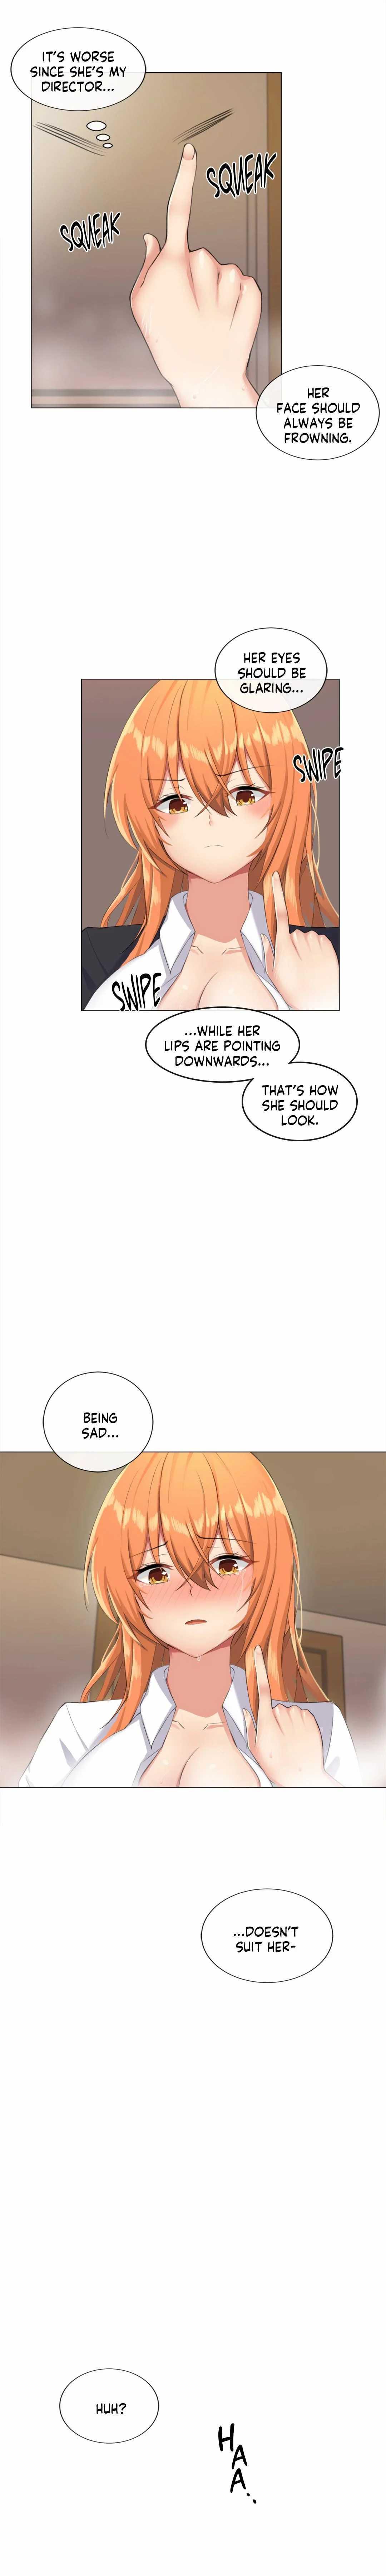 [Dumangoon, 130F] Sexcape Room: Pile Up Ch.9/9 [English] [Manhwa PDF] Completed 28